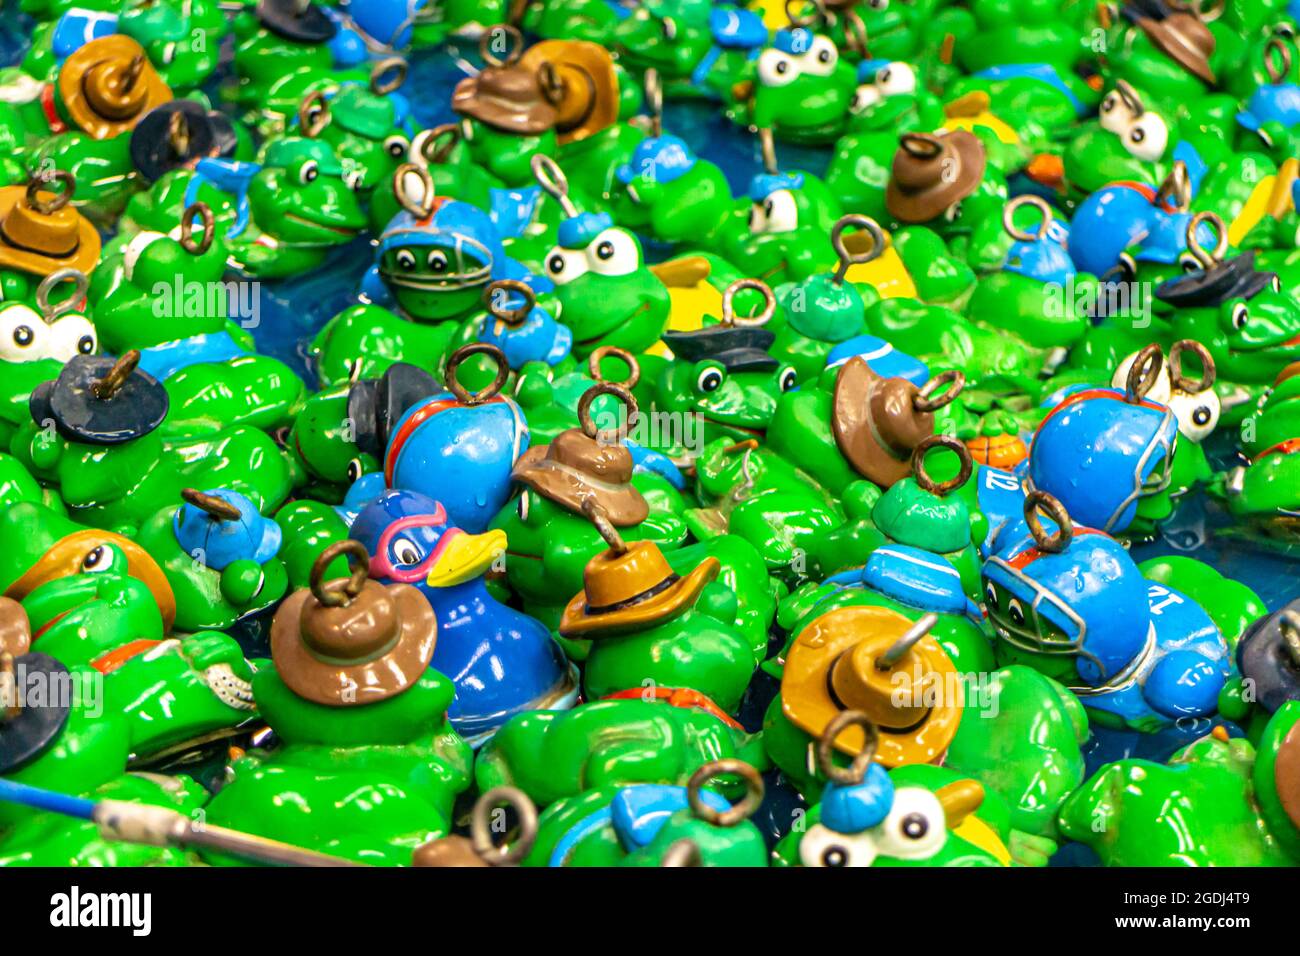 Children's game Duck fishing at a fair. Lots of green and blue plastic  frogs and plastic